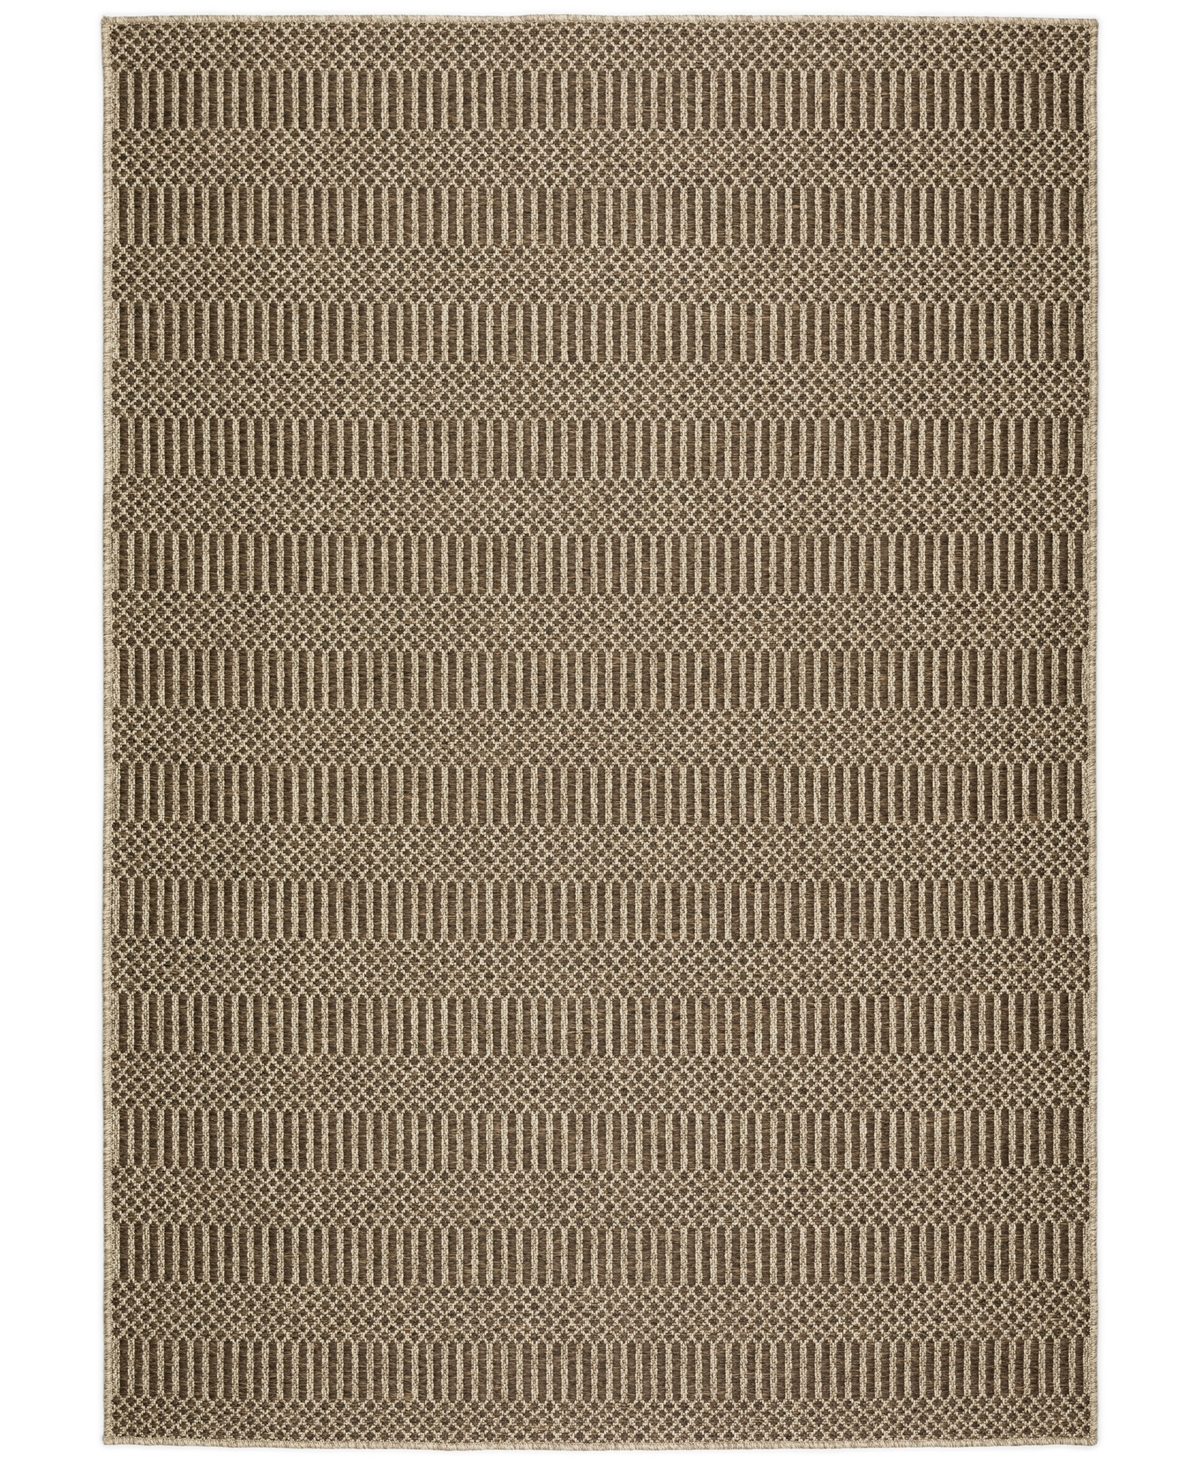 D Style Nusa Outdoor Nsa4 10' X 13' Area Rug In Chocolate